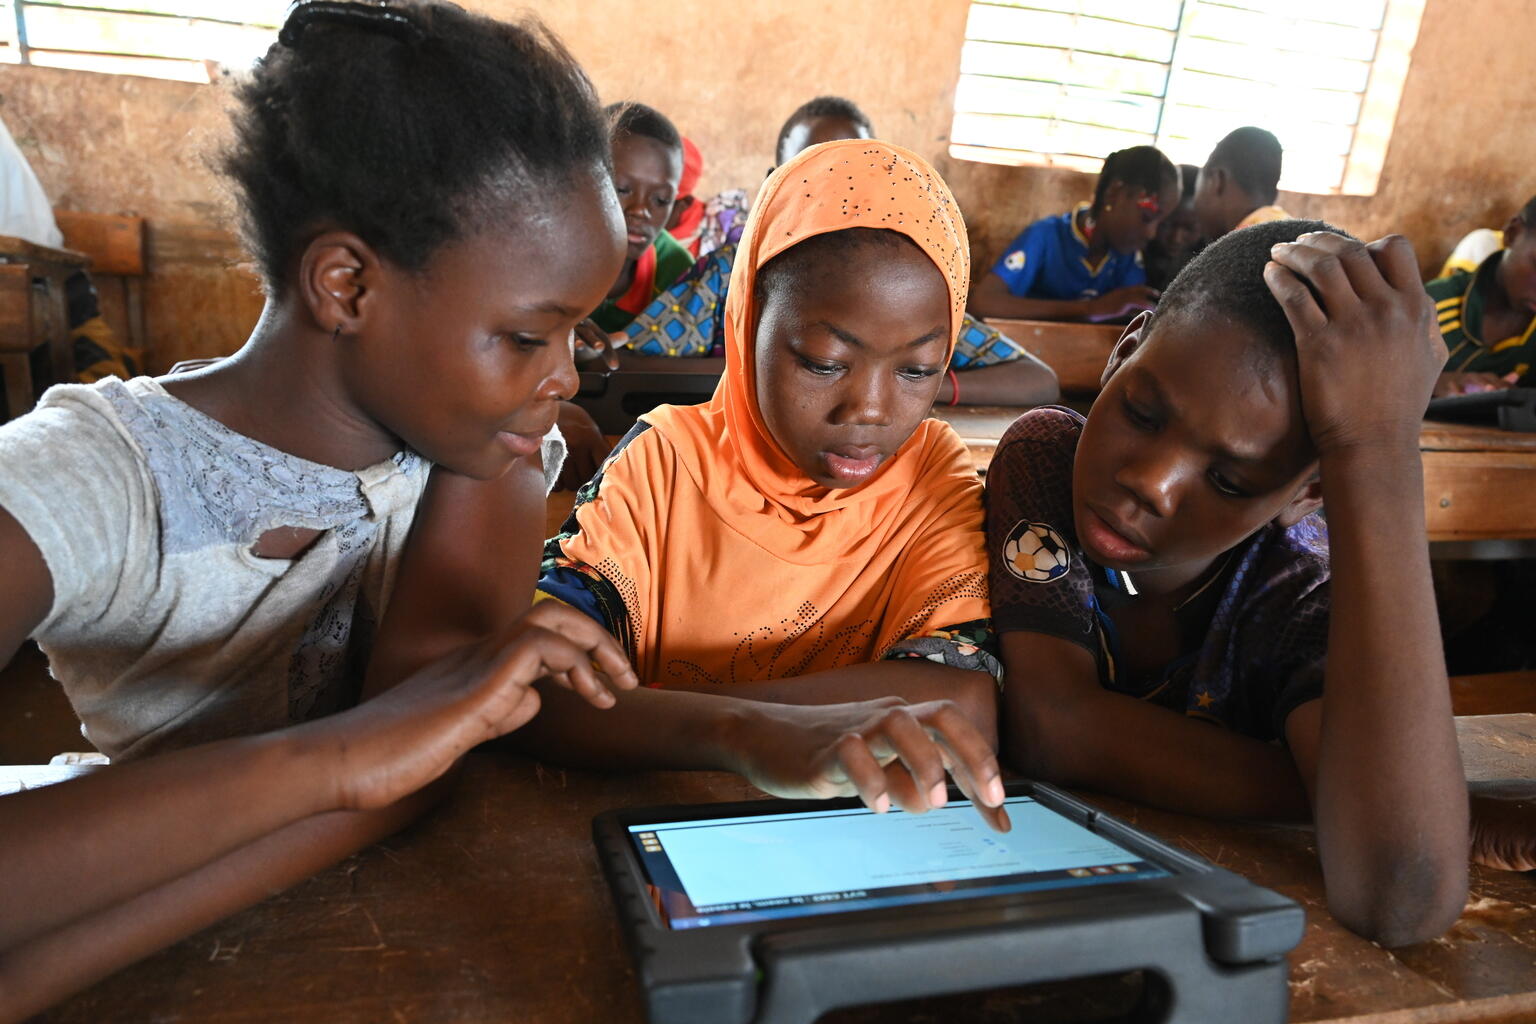 Pixframe’s fully offline version ensures uninterrupted learning even in areas with limited internet access. @UNICEF/UN0845017/Dejongh